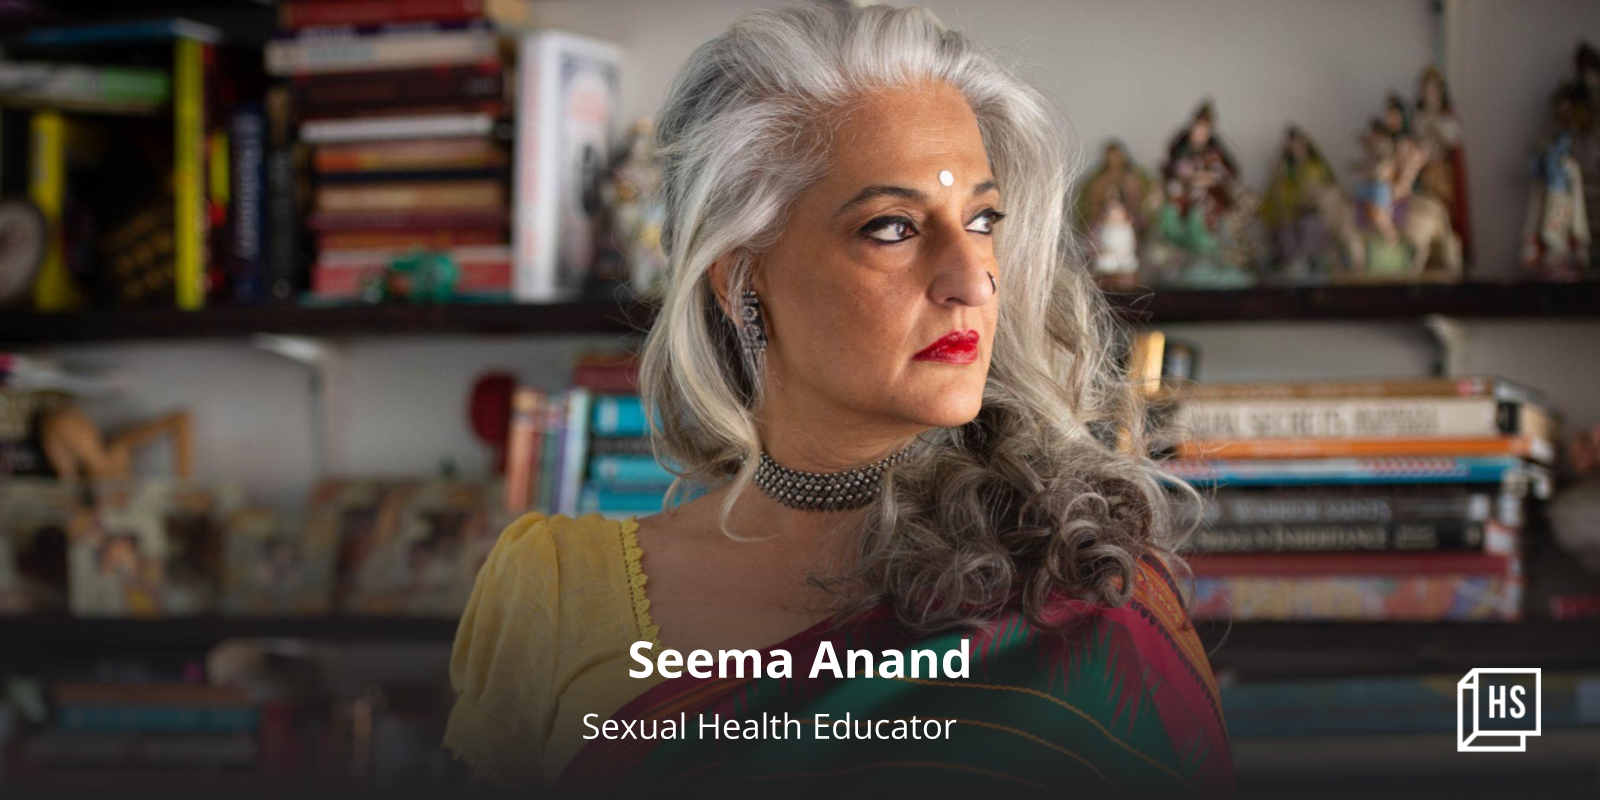 Women in India are starting to own their sexuality, says sex educator and Instagram star Seema Anand